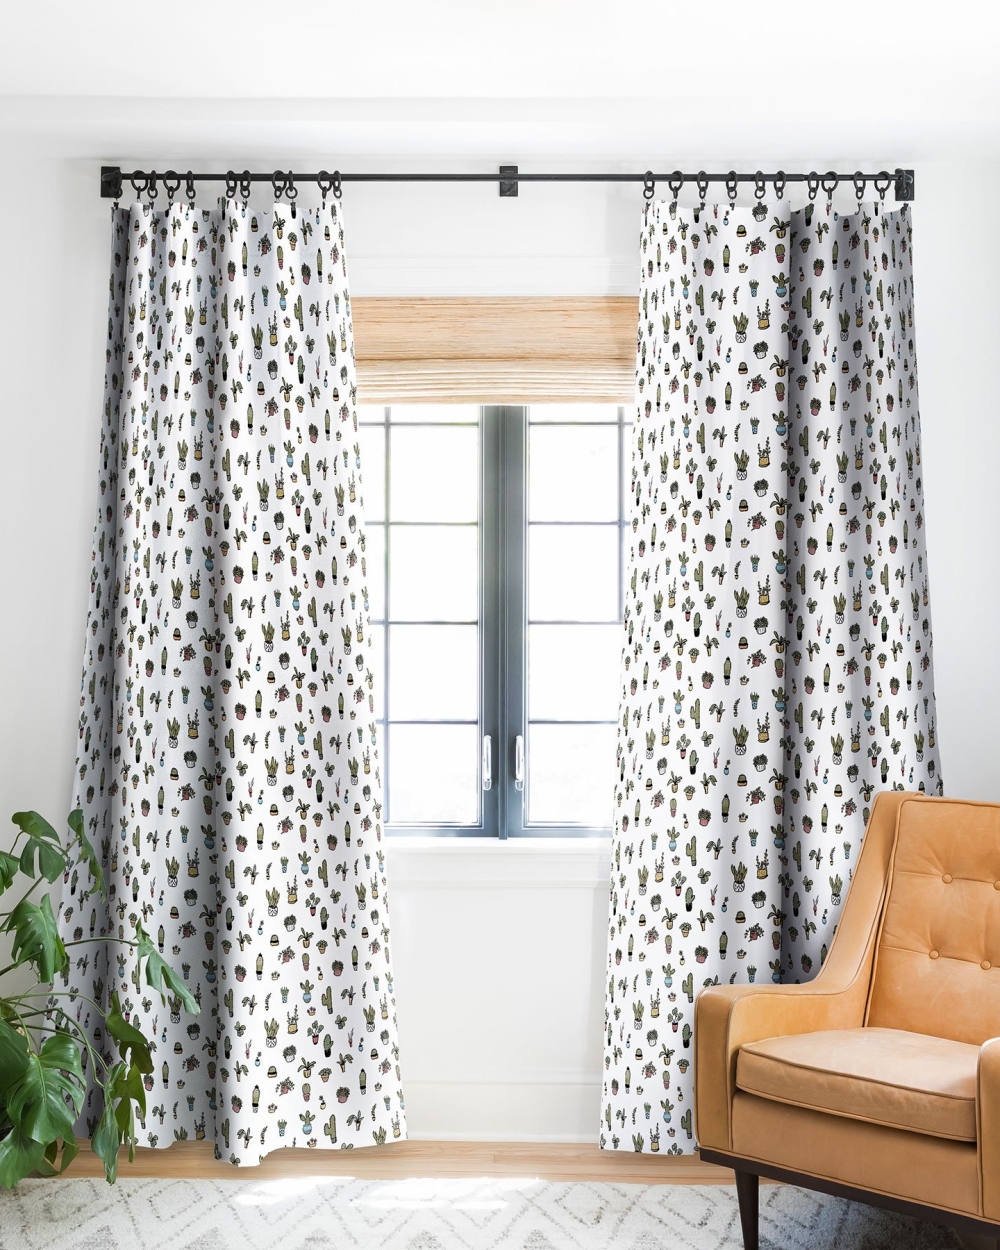 Plant Lady Blackout Curtain Panel by Wonder Forest